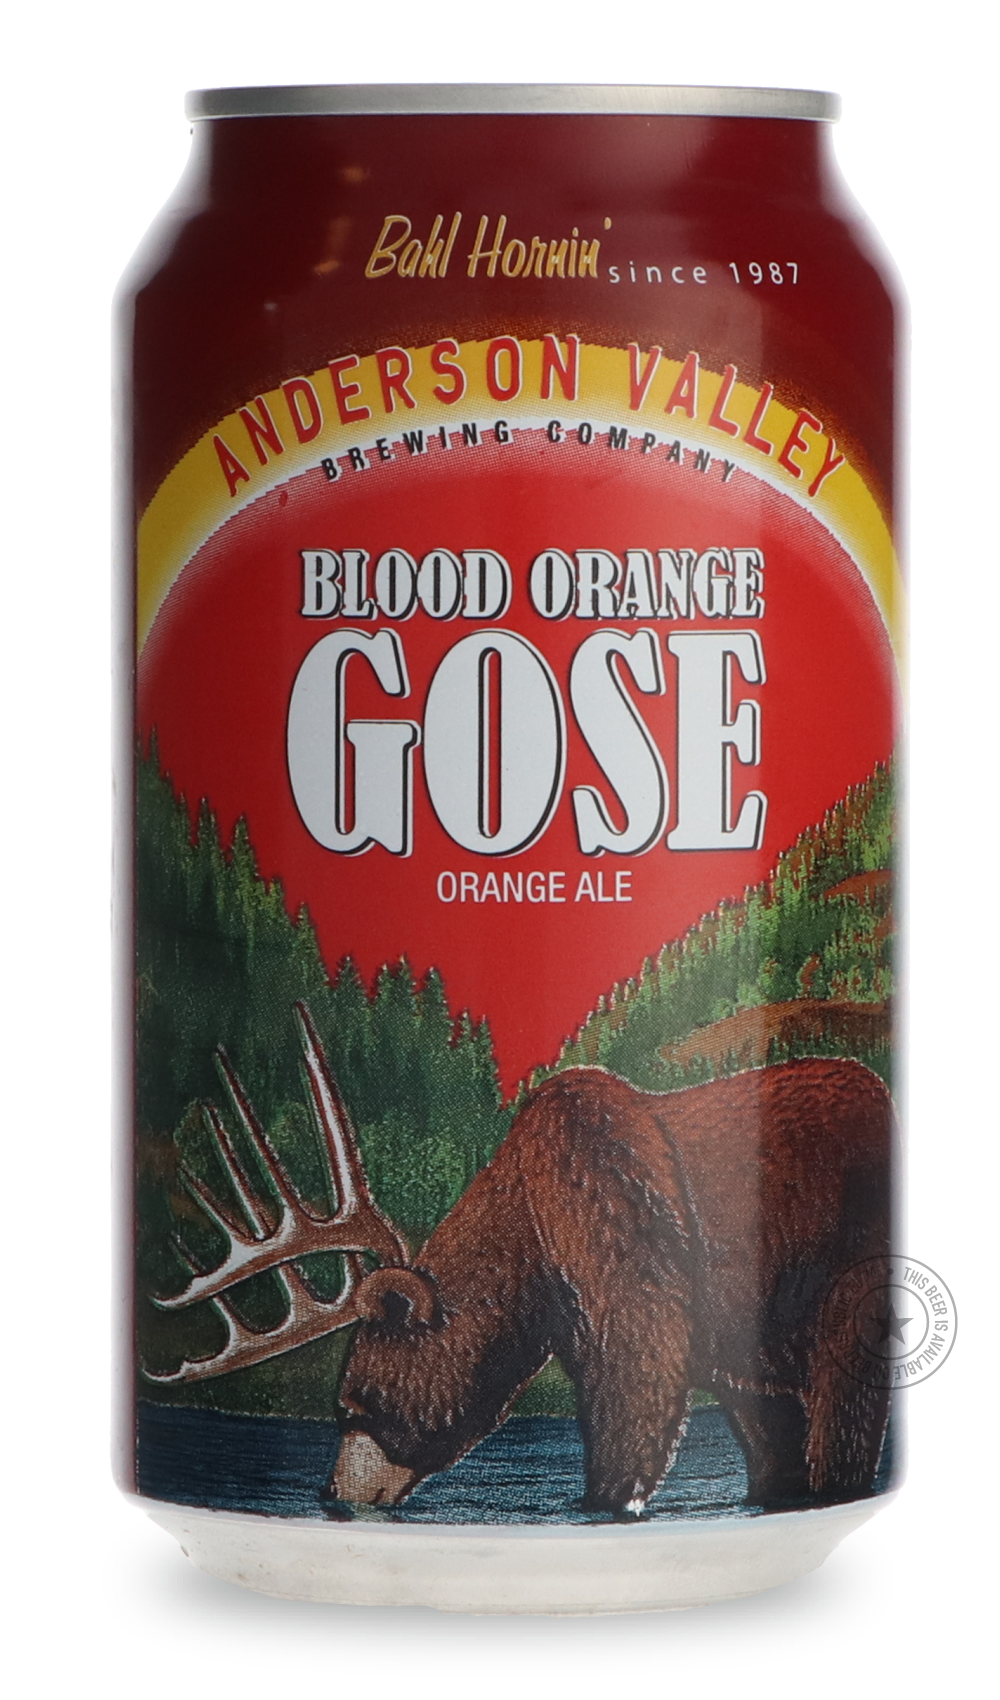 -Anderson Valley- Blood Orange Gose-Sour / Wild & Fruity- Only @ Beer Republic - The best online beer store for American & Canadian craft beer - Buy beer online from the USA and Canada - Bier online kopen - Amerikaans bier kopen - Craft beer store - Craft beer kopen - Amerikanisch bier kaufen - Bier online kaufen - Acheter biere online - IPA - Stout - Porter - New England IPA - Hazy IPA - Imperial Stout - Barrel Aged - Barrel Aged Imperial Stout - Brown - Dark beer - Blond - Blonde - Pilsner - Lager - Wheat